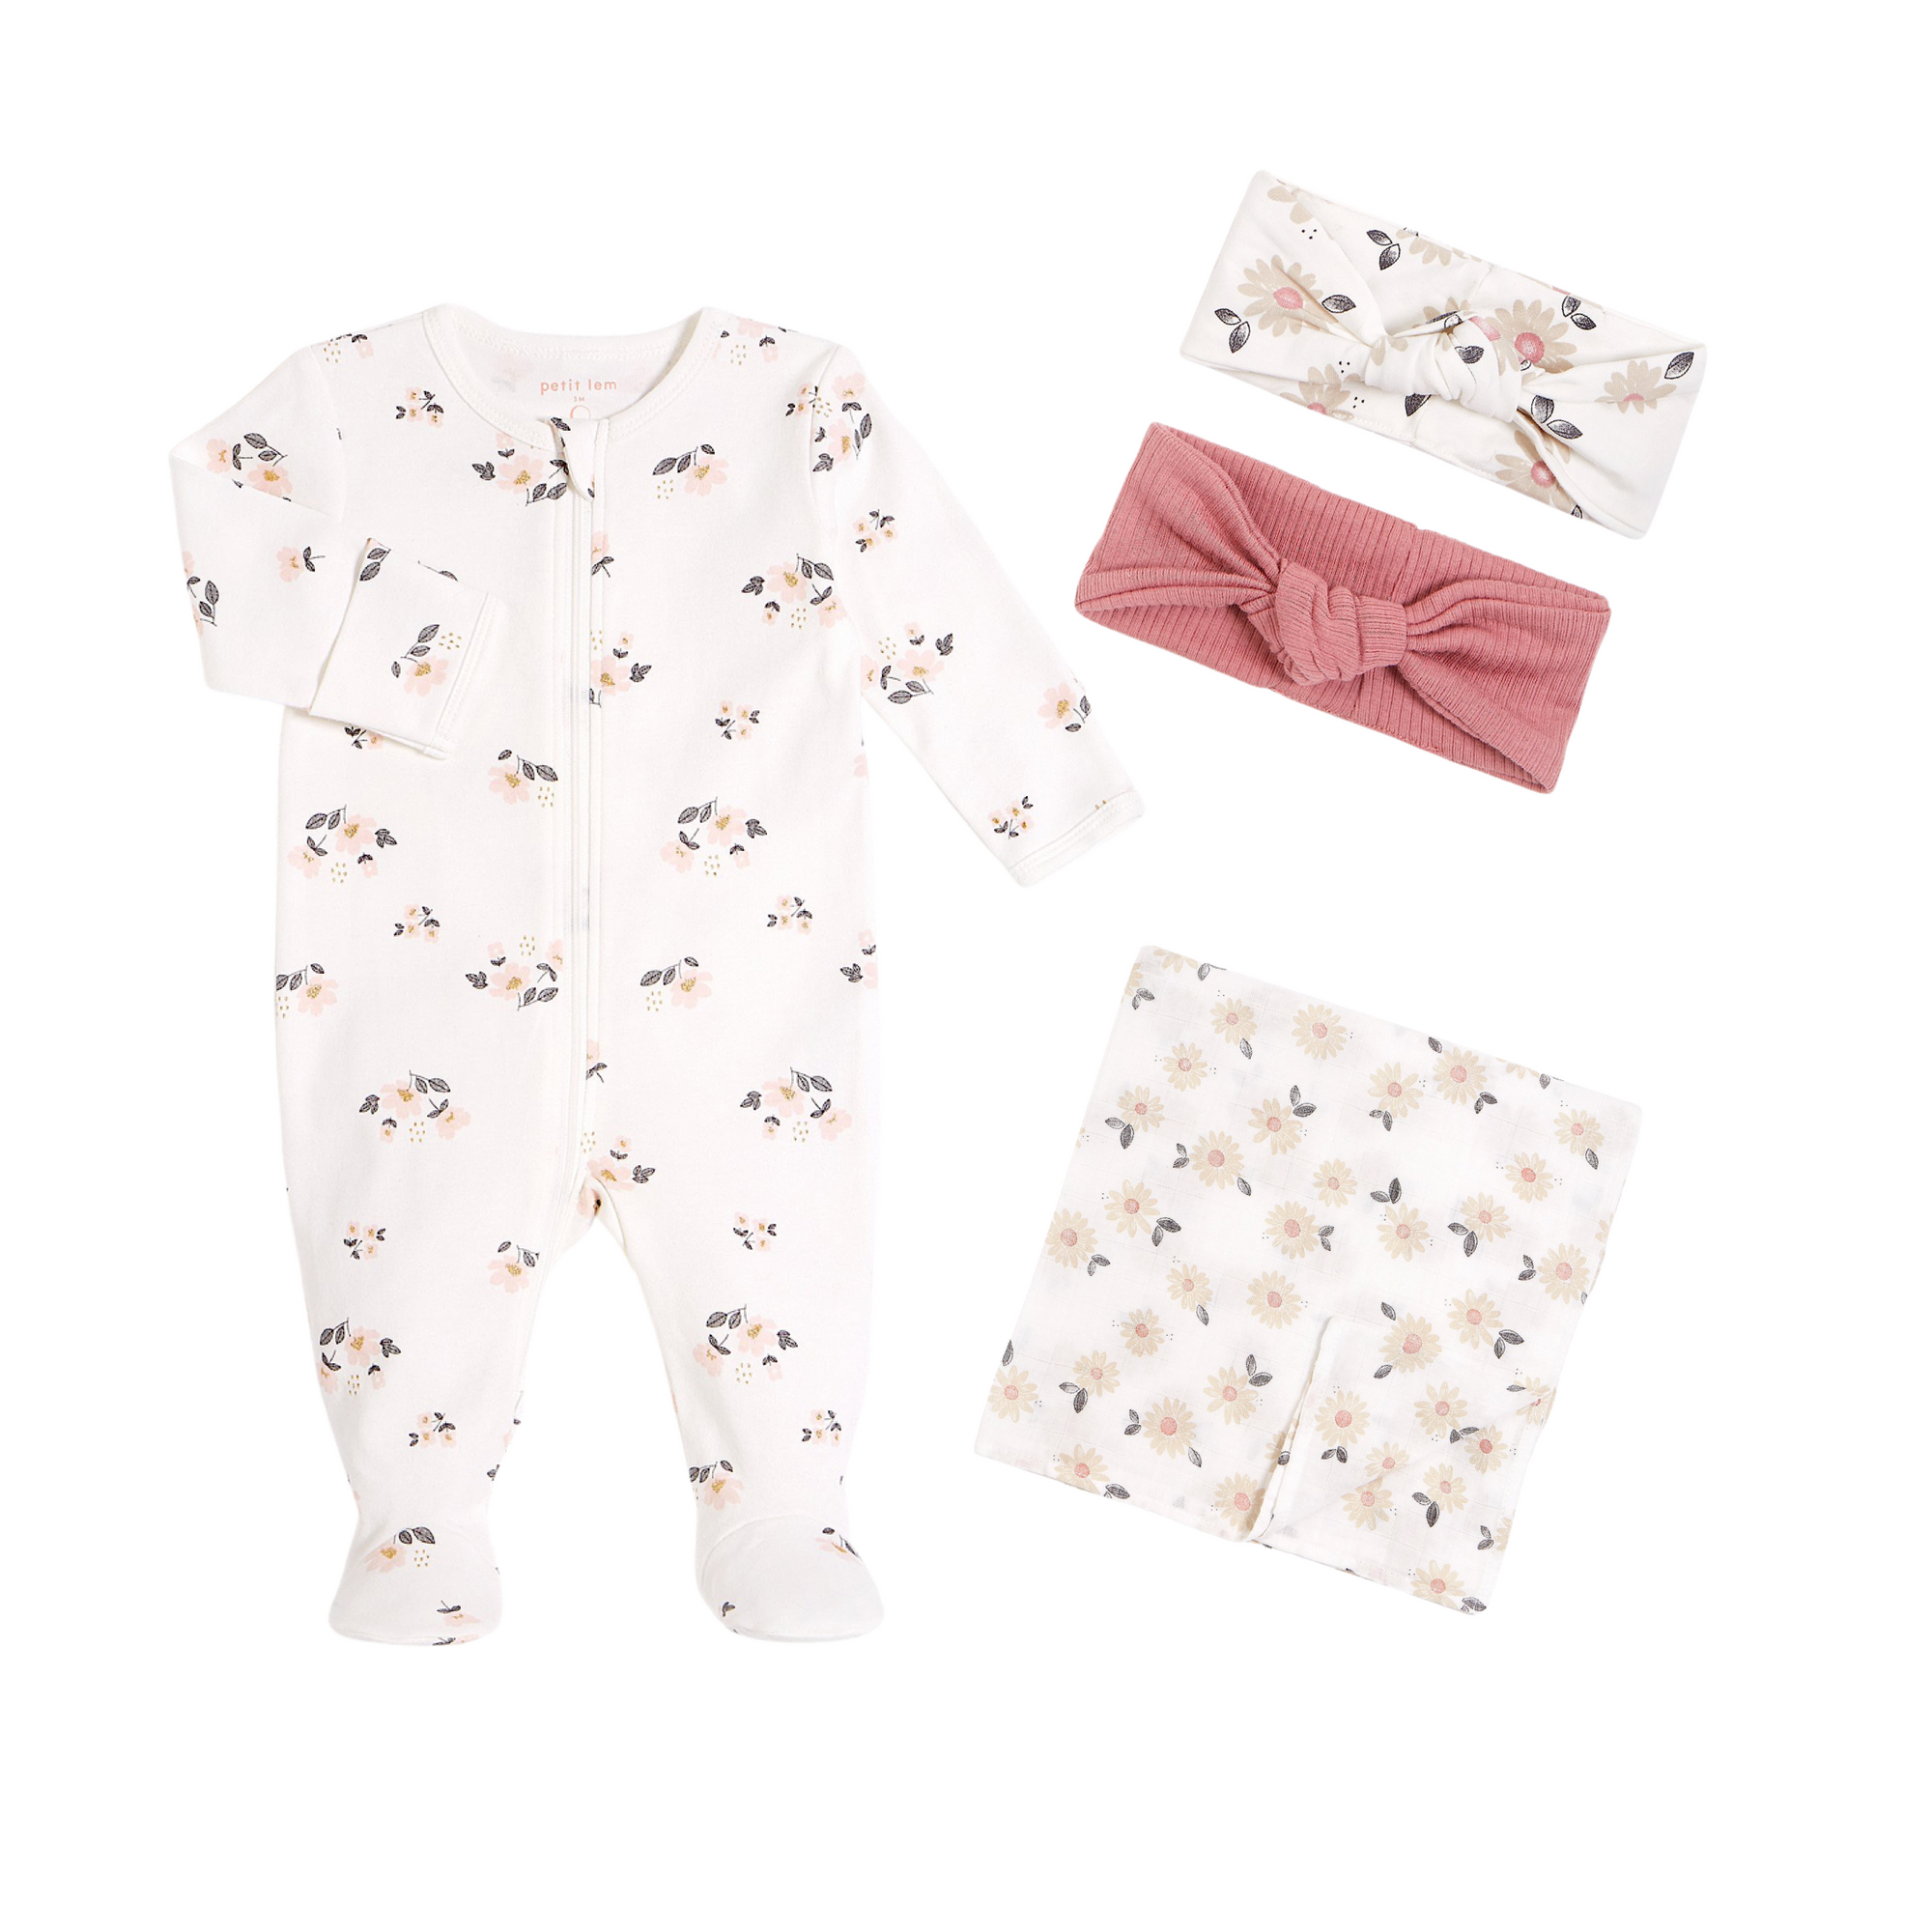 Daisy Blossoms Muslin Swaddle